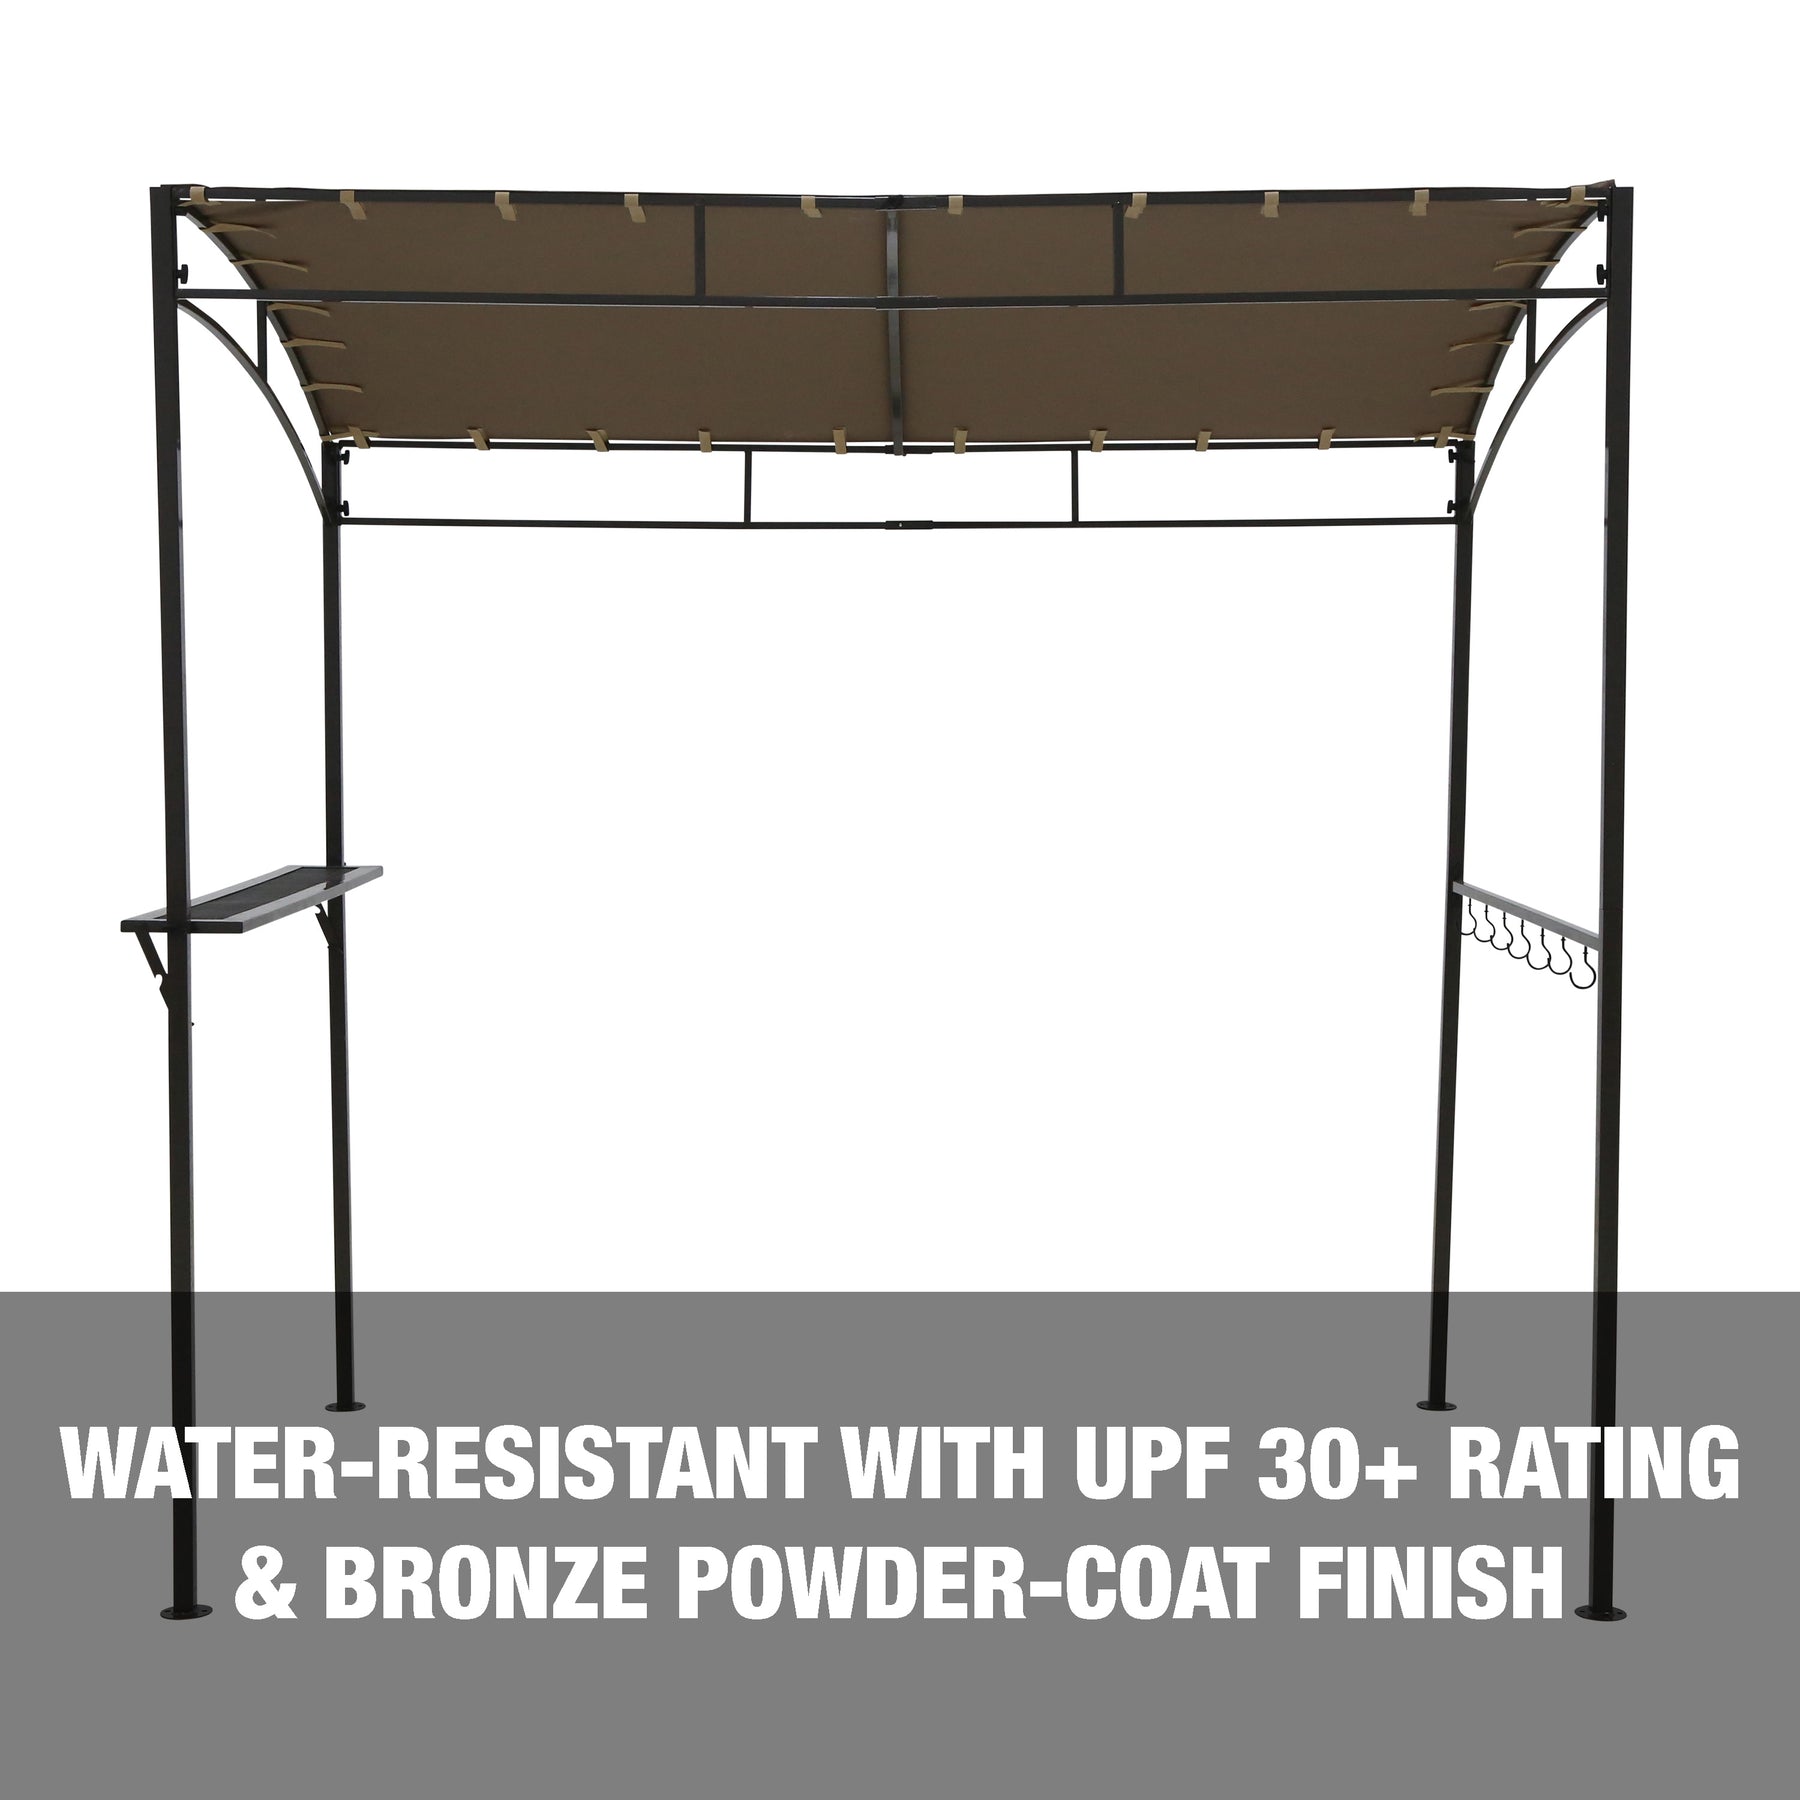 Water-resistant with UPF 30 rating and bronze powder-coat finish.